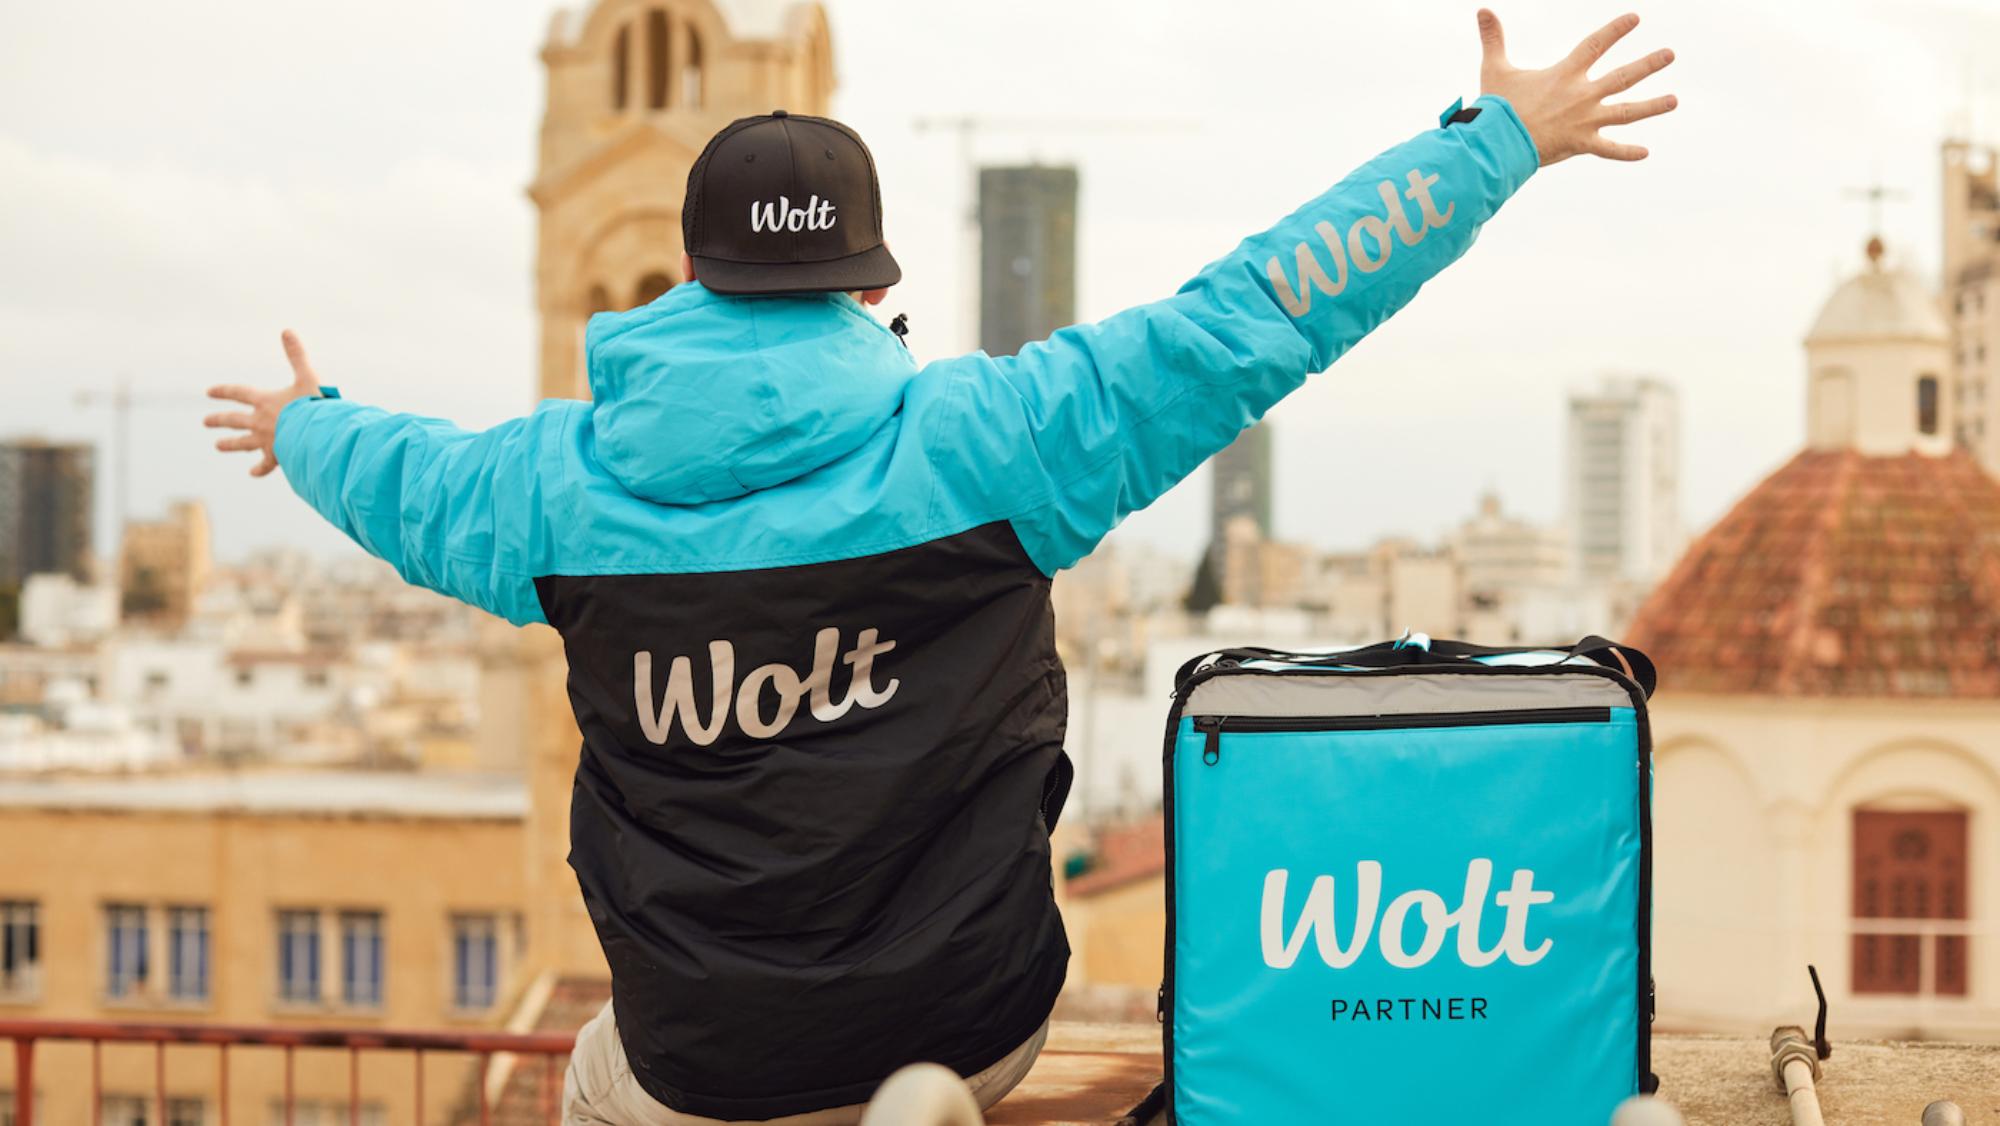 Wolt lands record EUR 440 million in funding